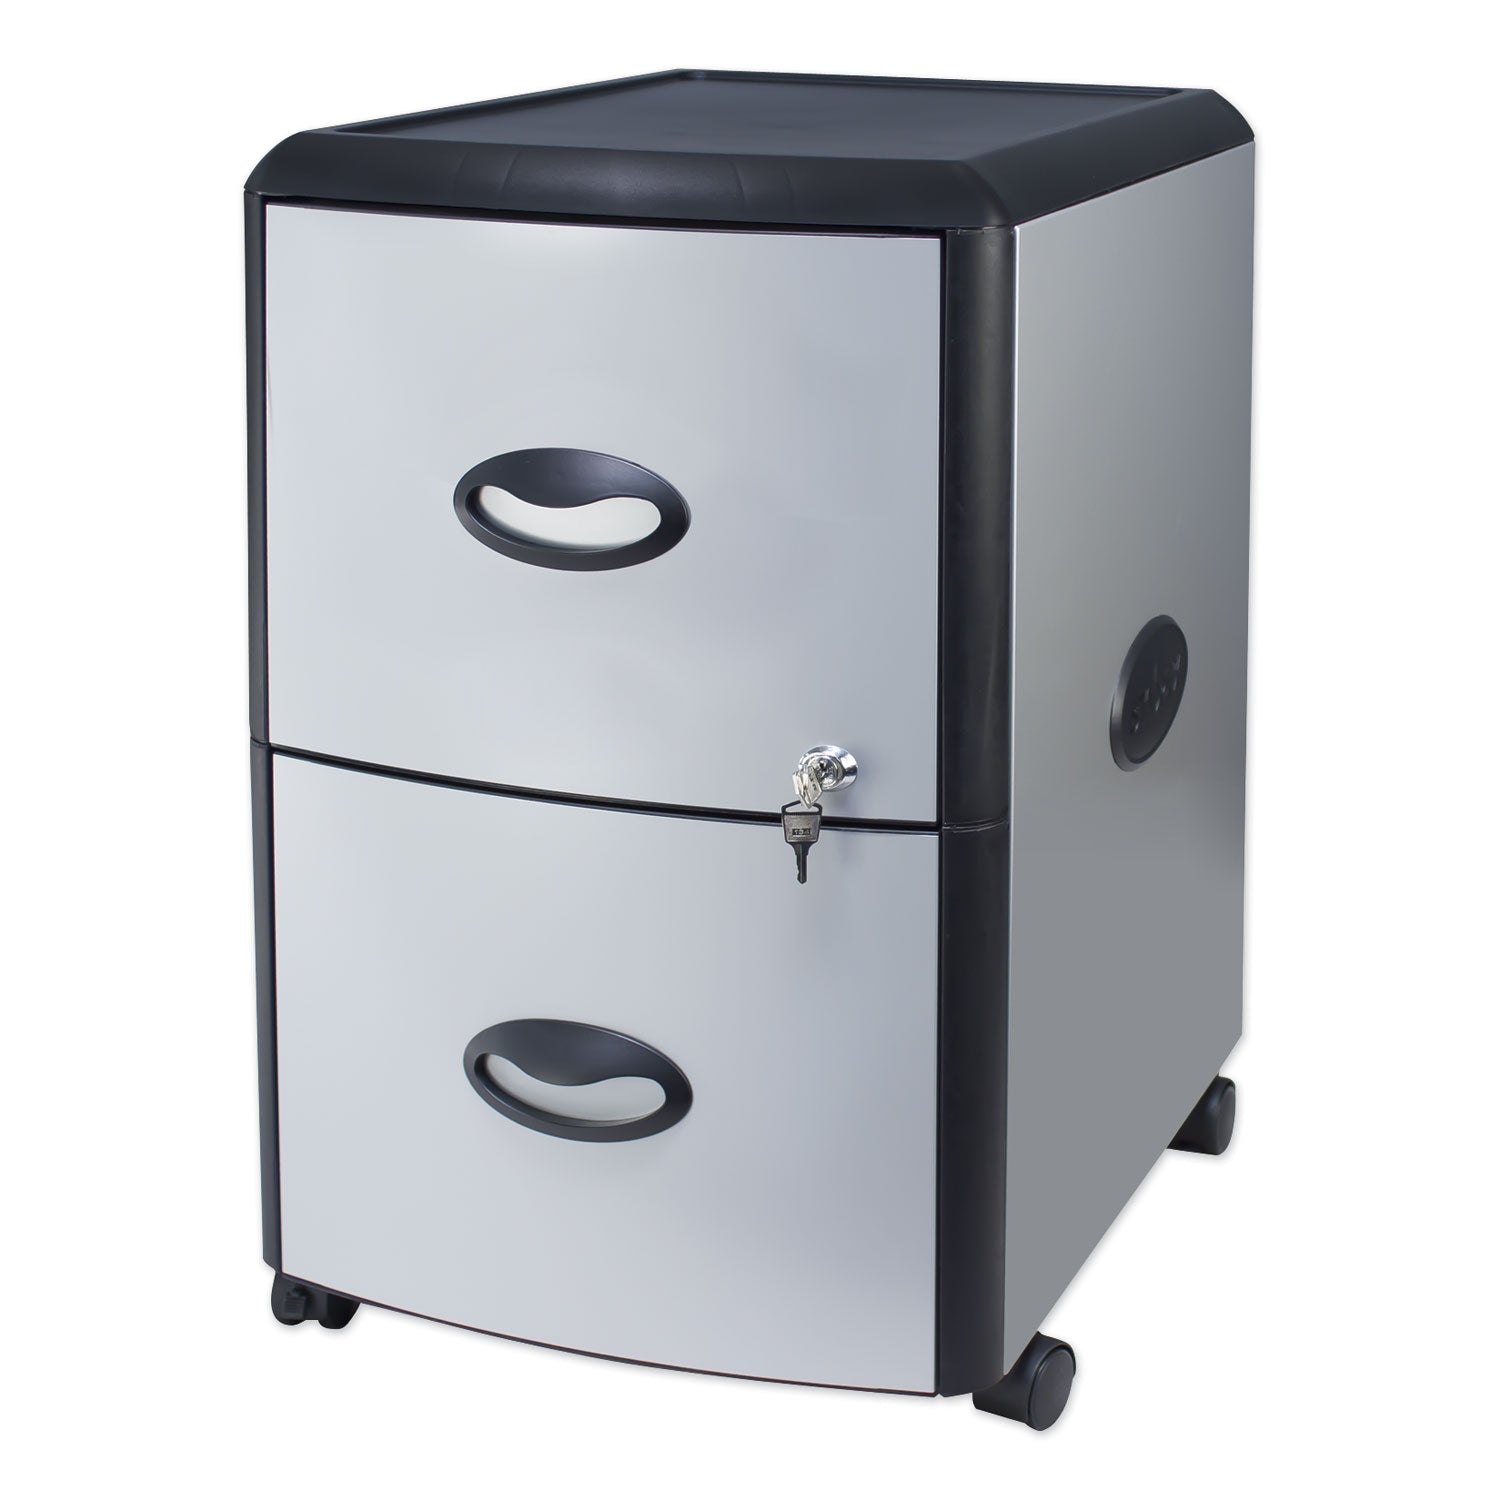 Mobile Filing Cabinet with Metal Siding, 2 Letter-Size File Drawers, Silver/Black, 19" x 15" x 23 - 